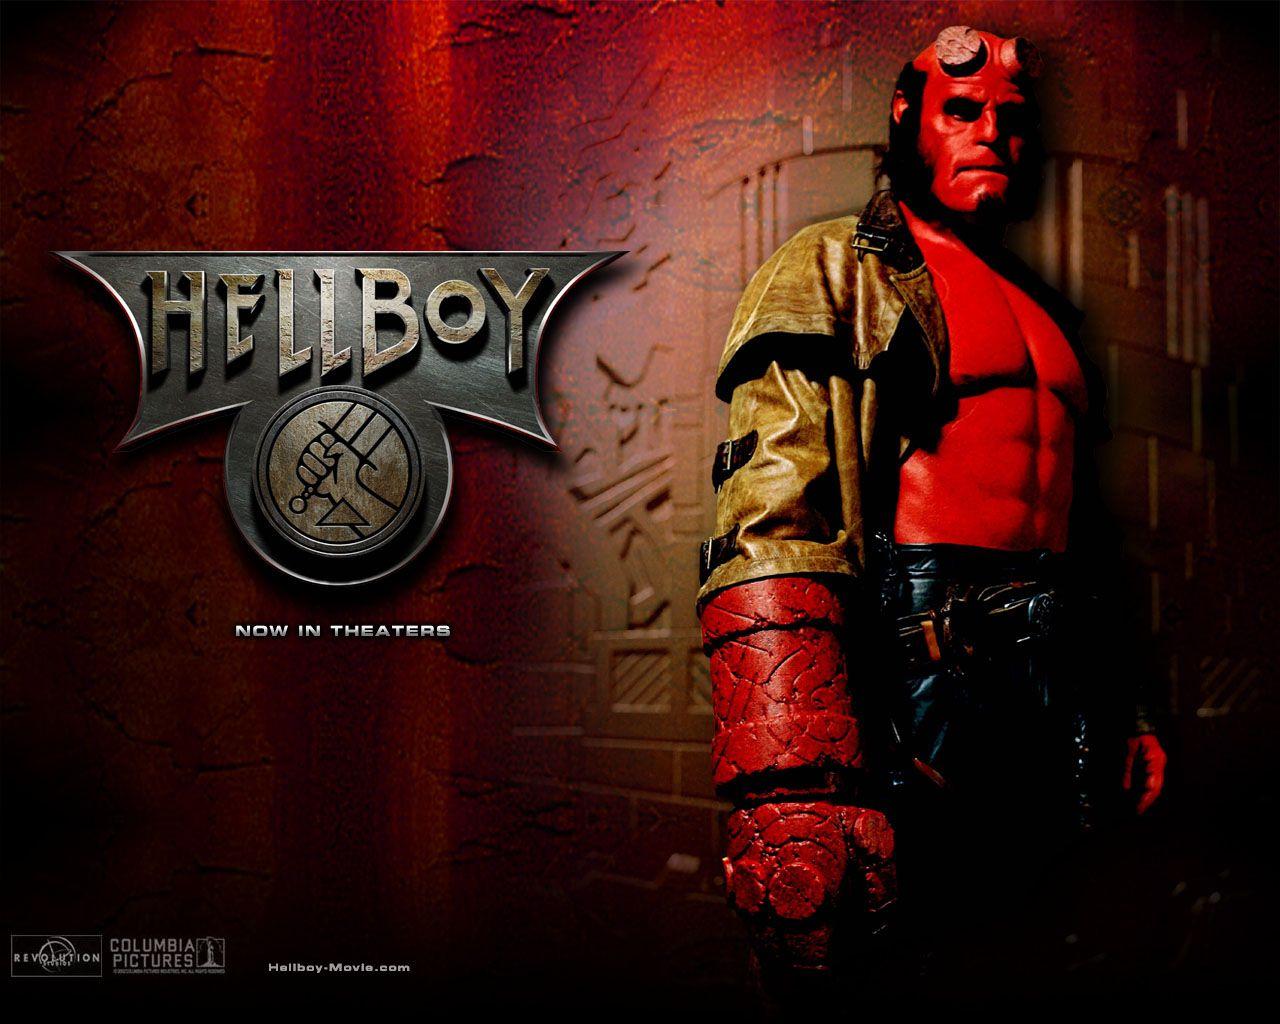 HELL BOY image hellboy HD wallpaper and background photo